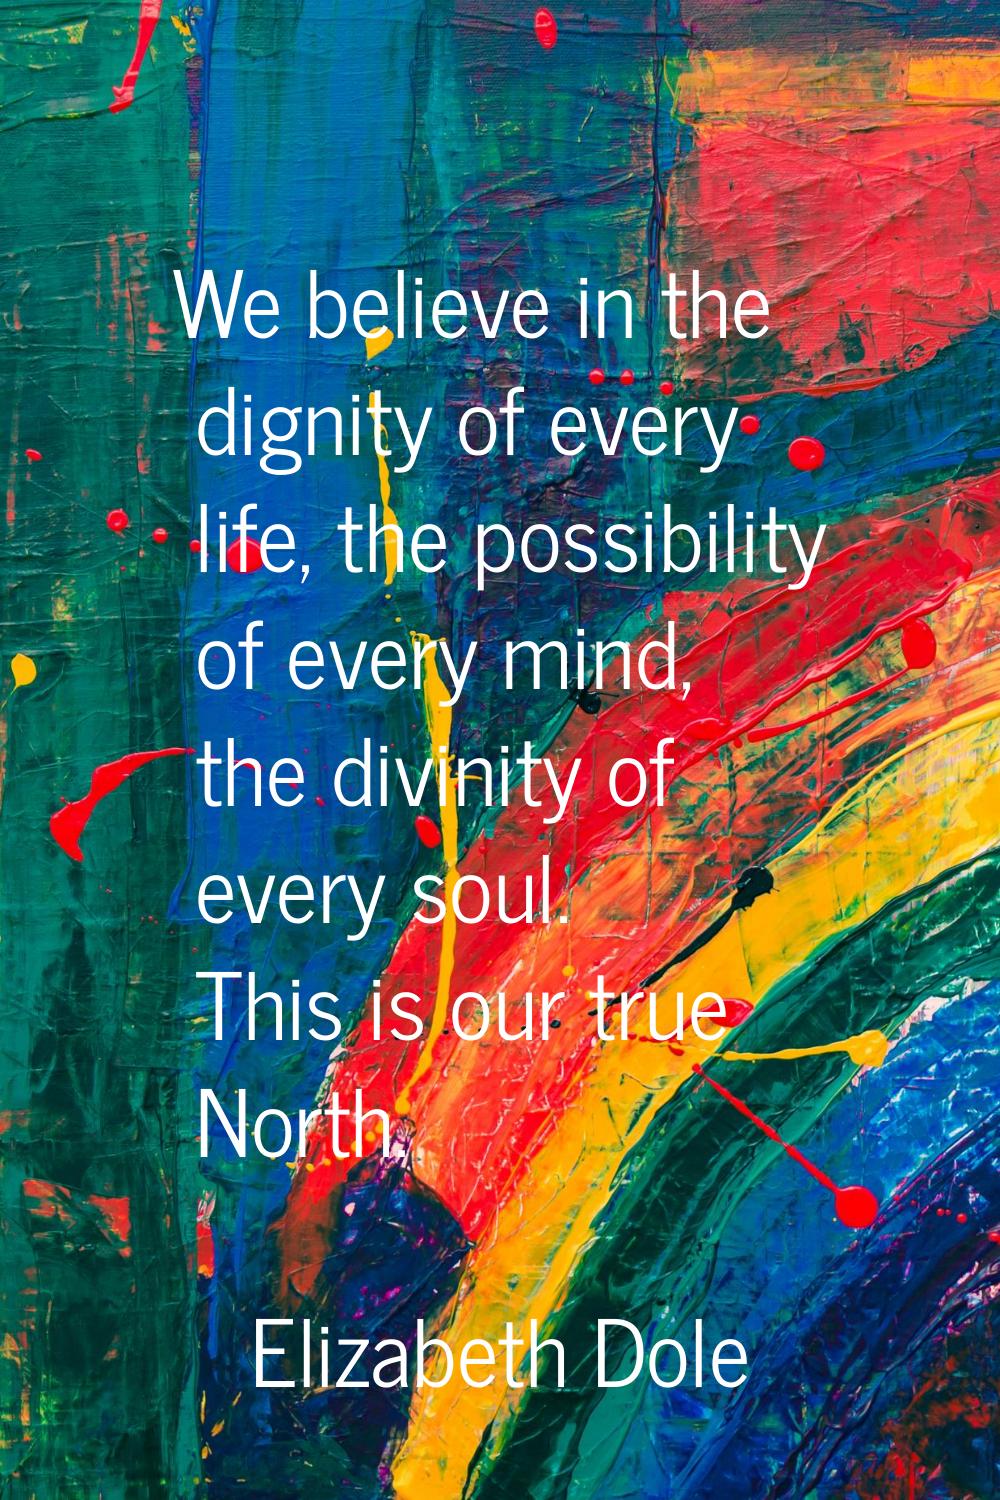 We believe in the dignity of every life, the possibility of every mind, the divinity of every soul.